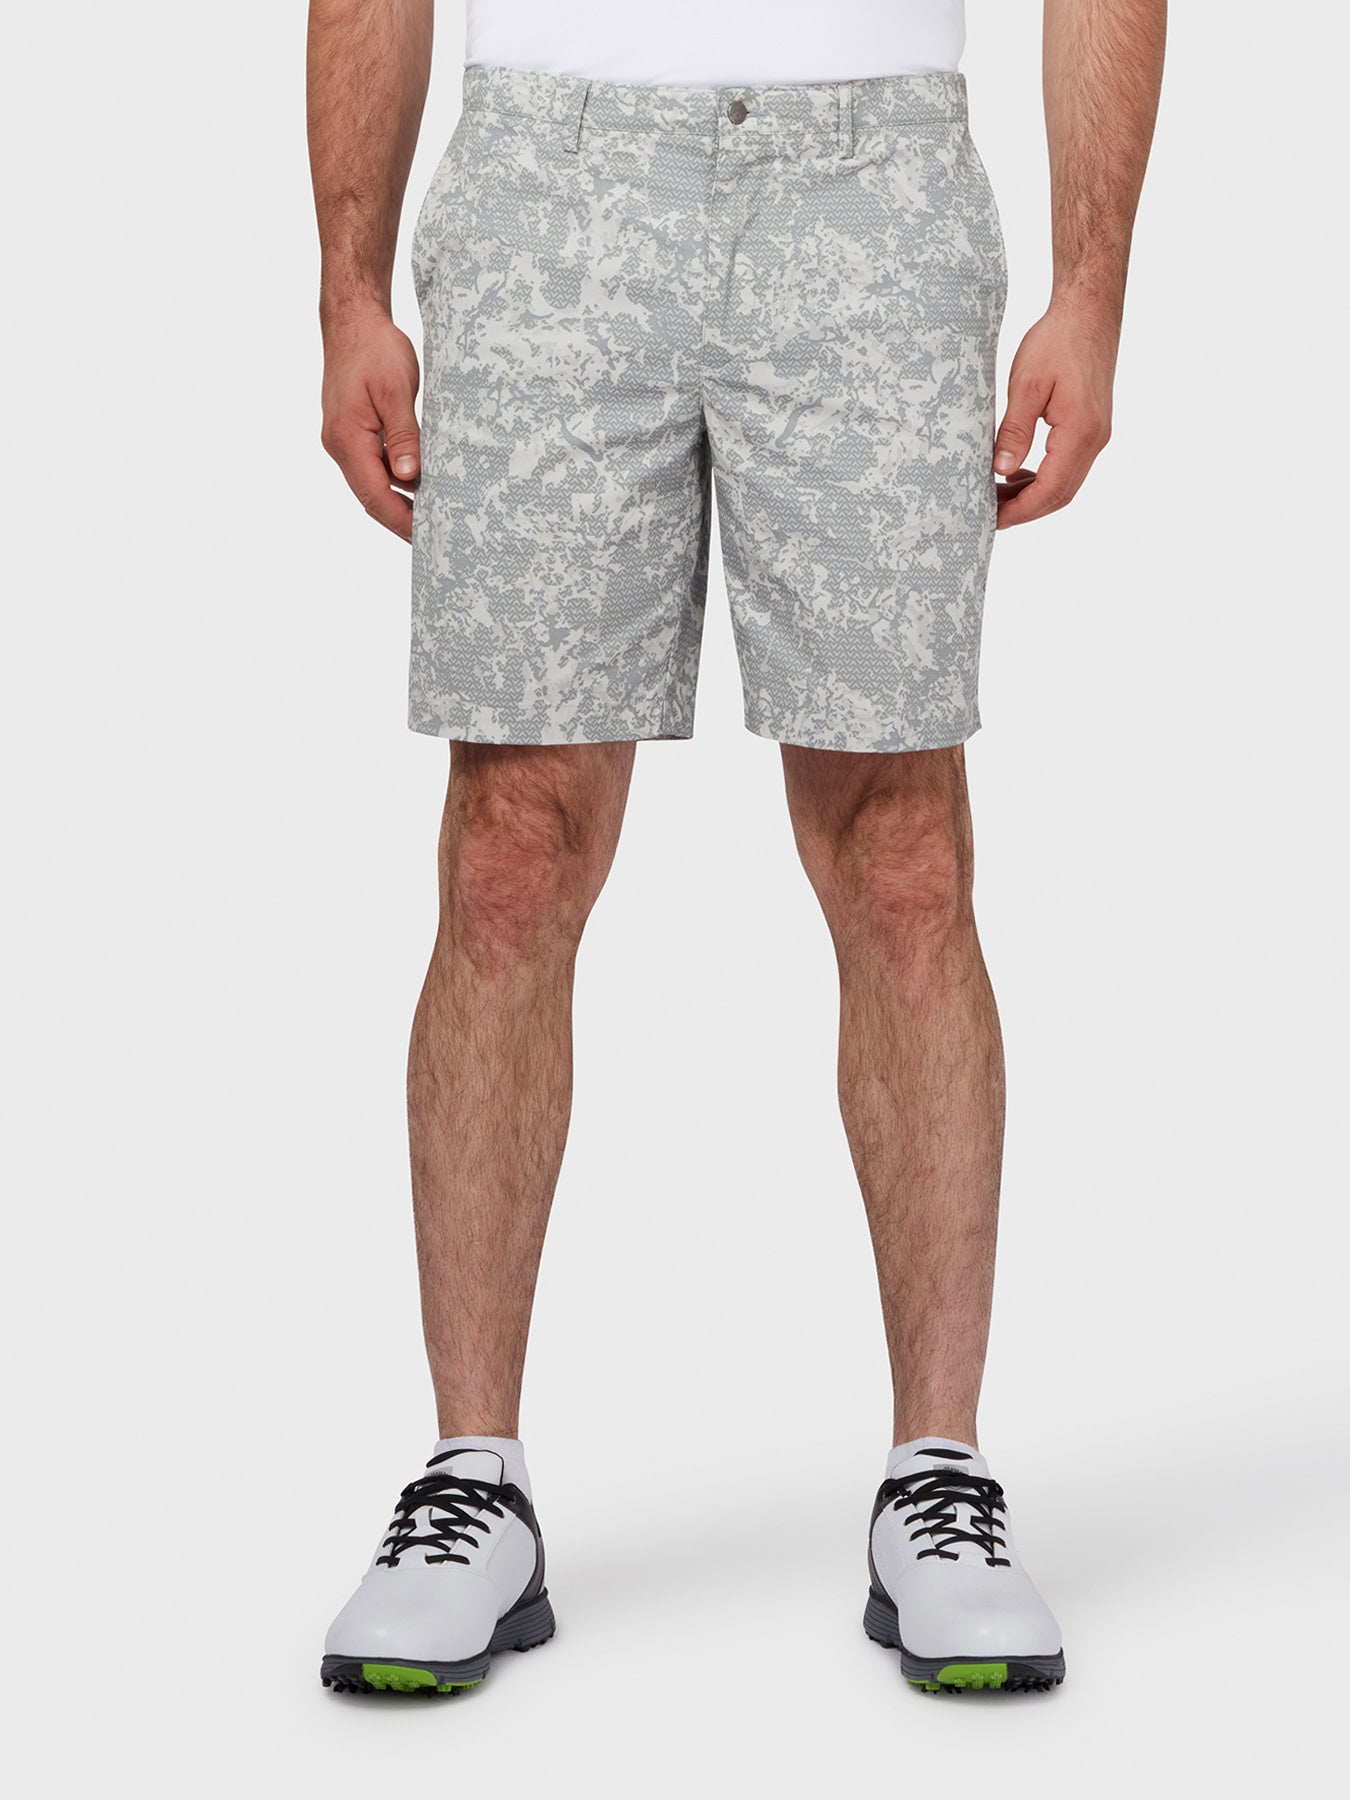 View X Series Abstract Camo Shorts In Quarry Grey Quarry 32 information